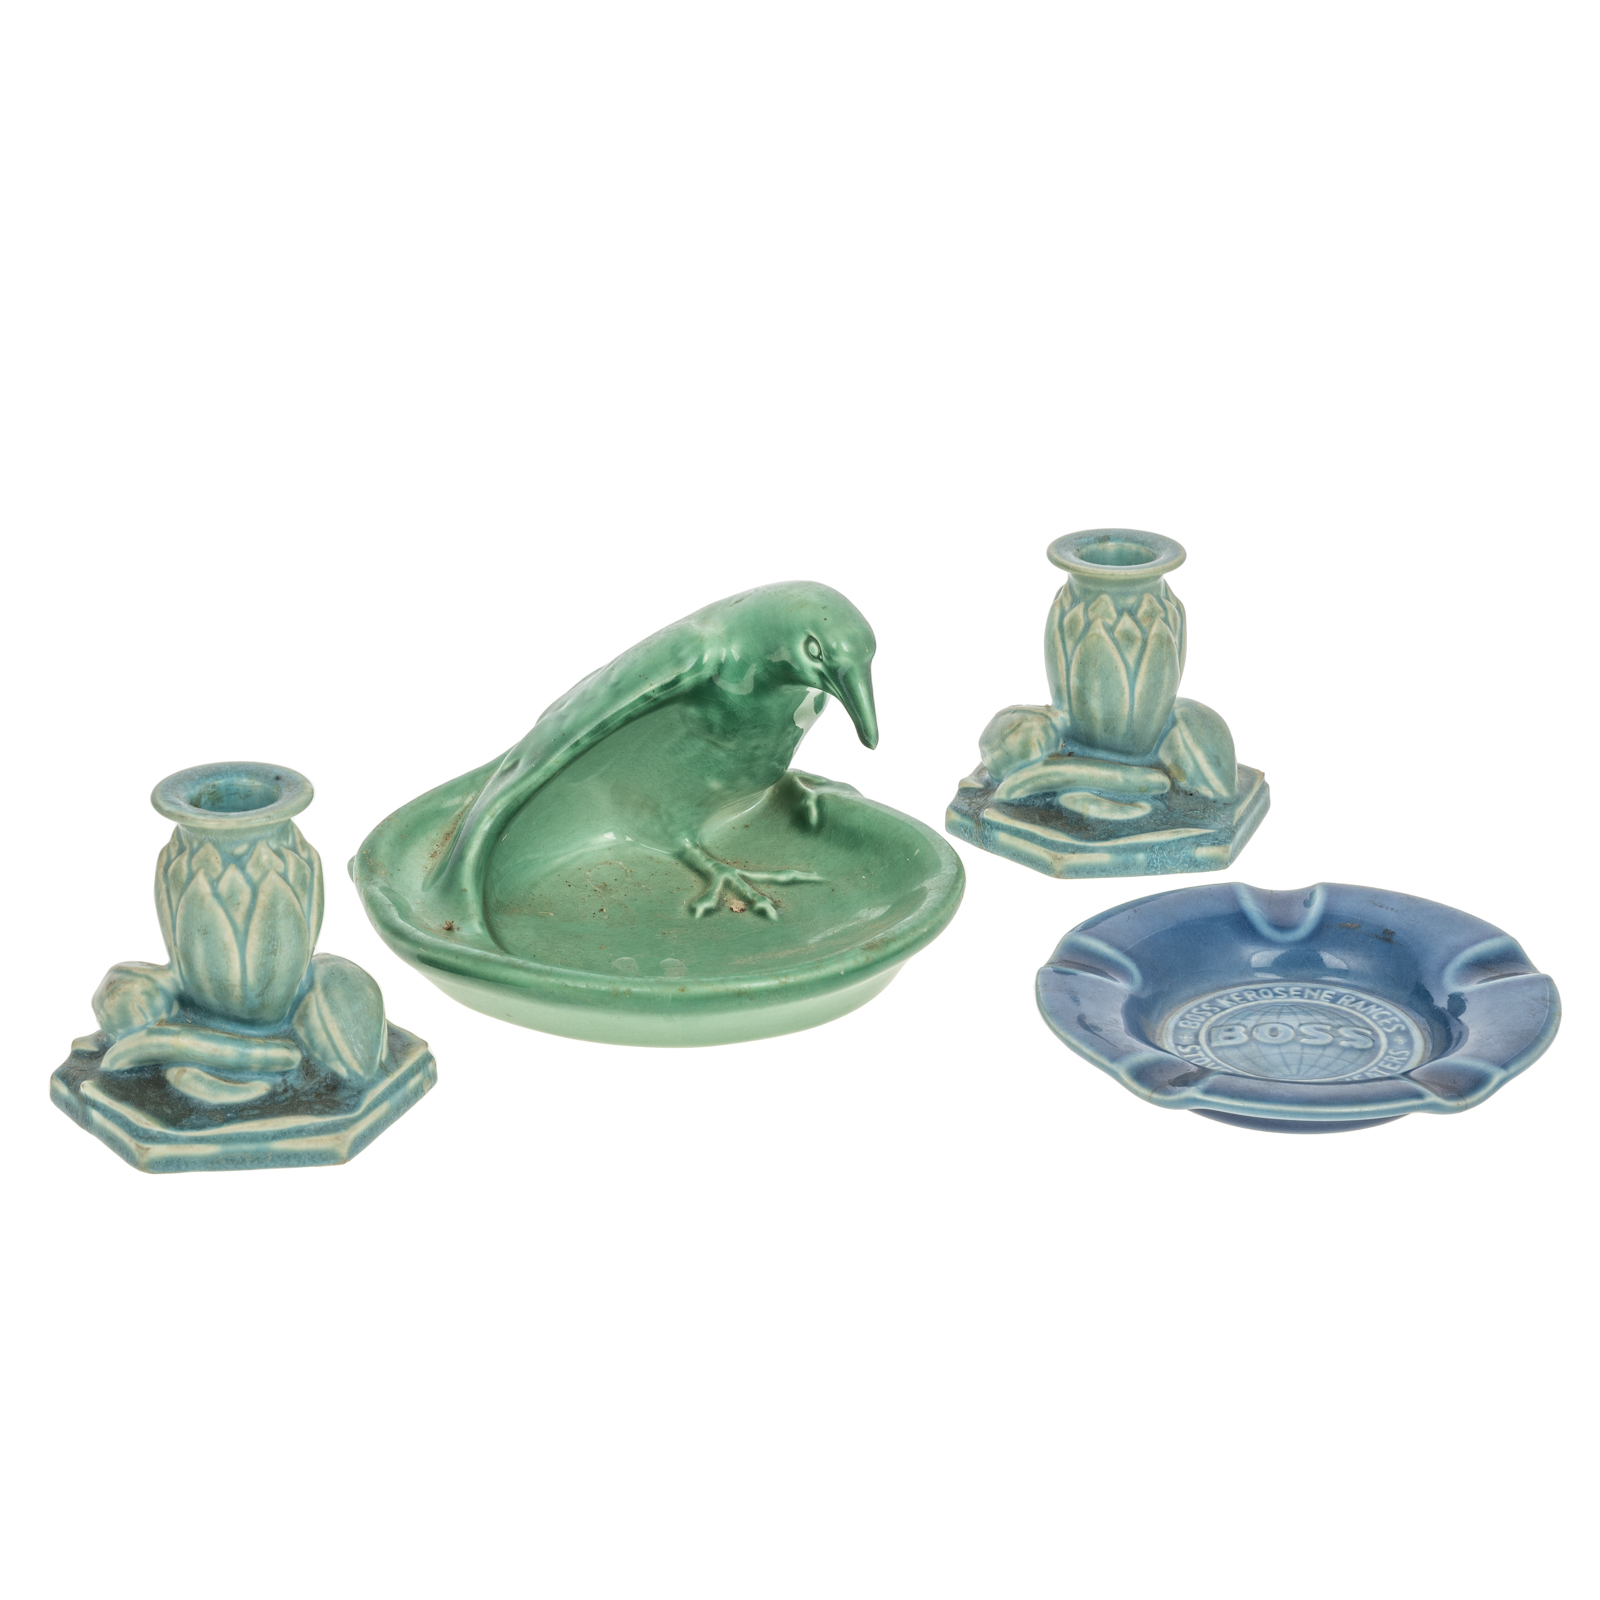 FOUR ROOKWOOD POTTERY ITEMS Includes